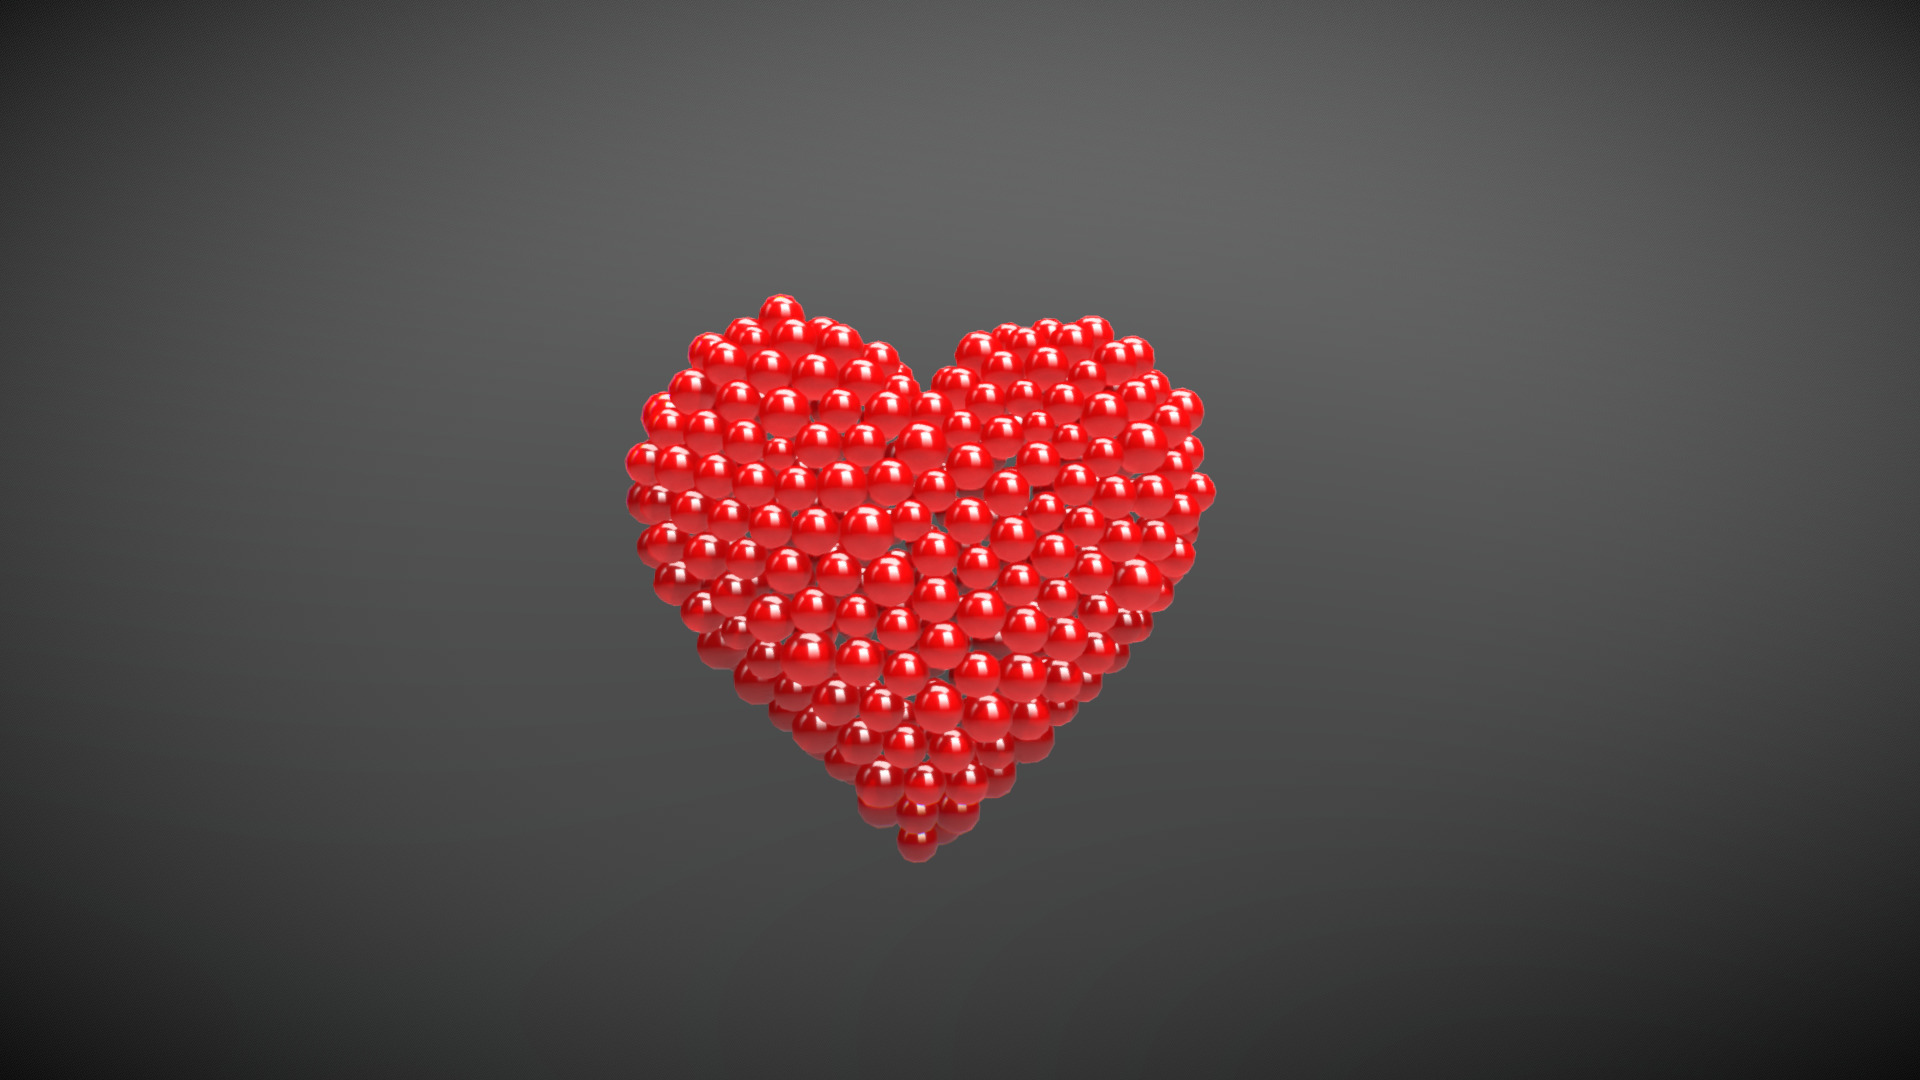 3D model heart shape forming animation from spheres - This is a 3D model of the heart shape forming animation from spheres. The 3D model is about a red heart made of small white dots.